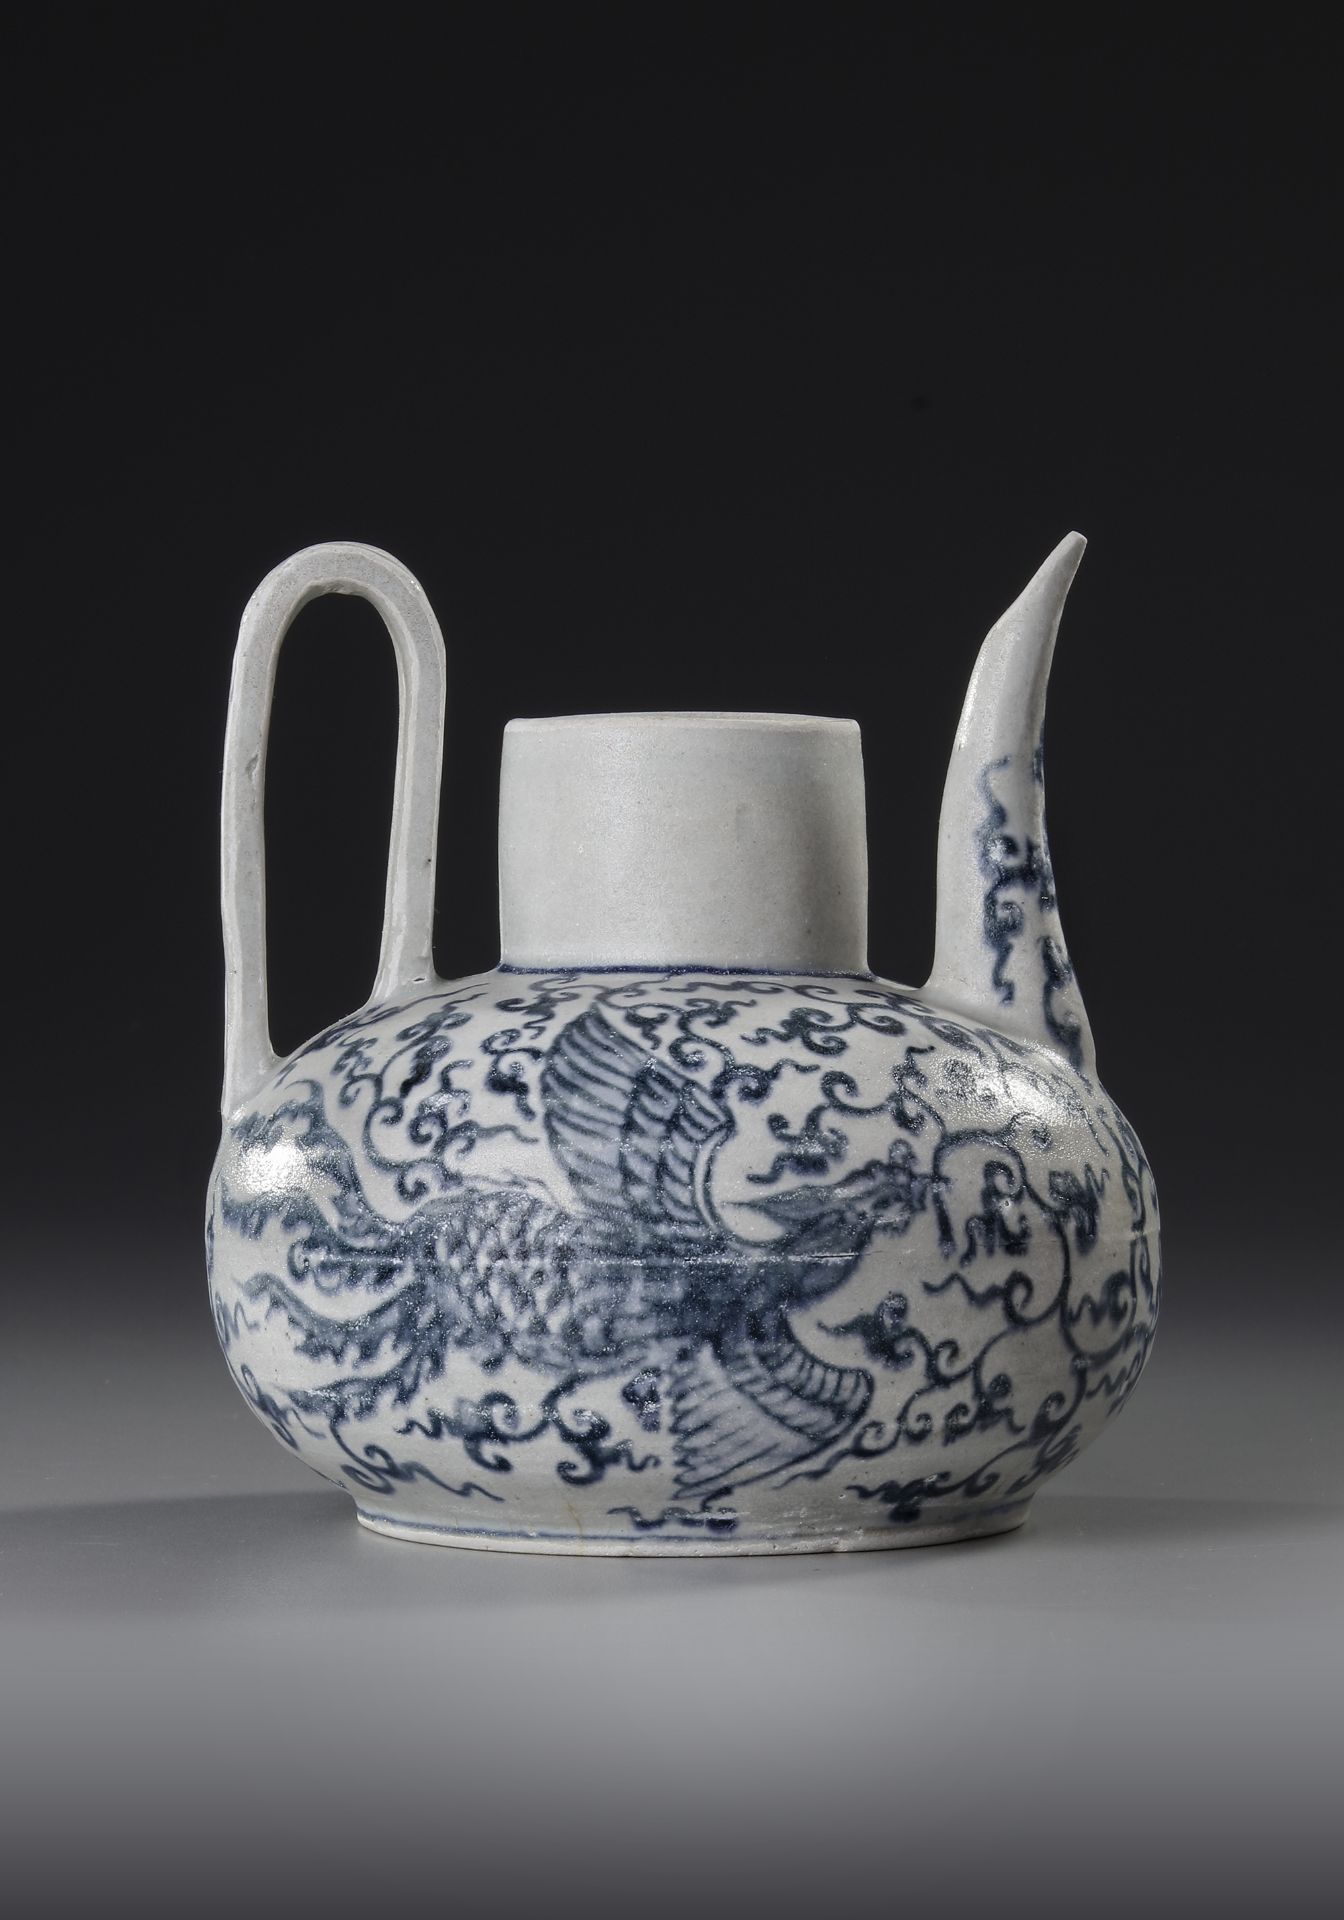 FOUR CHINESE BLUE AND WHITE WARES, MING DYNASTY (1368-1644) - Image 2 of 6